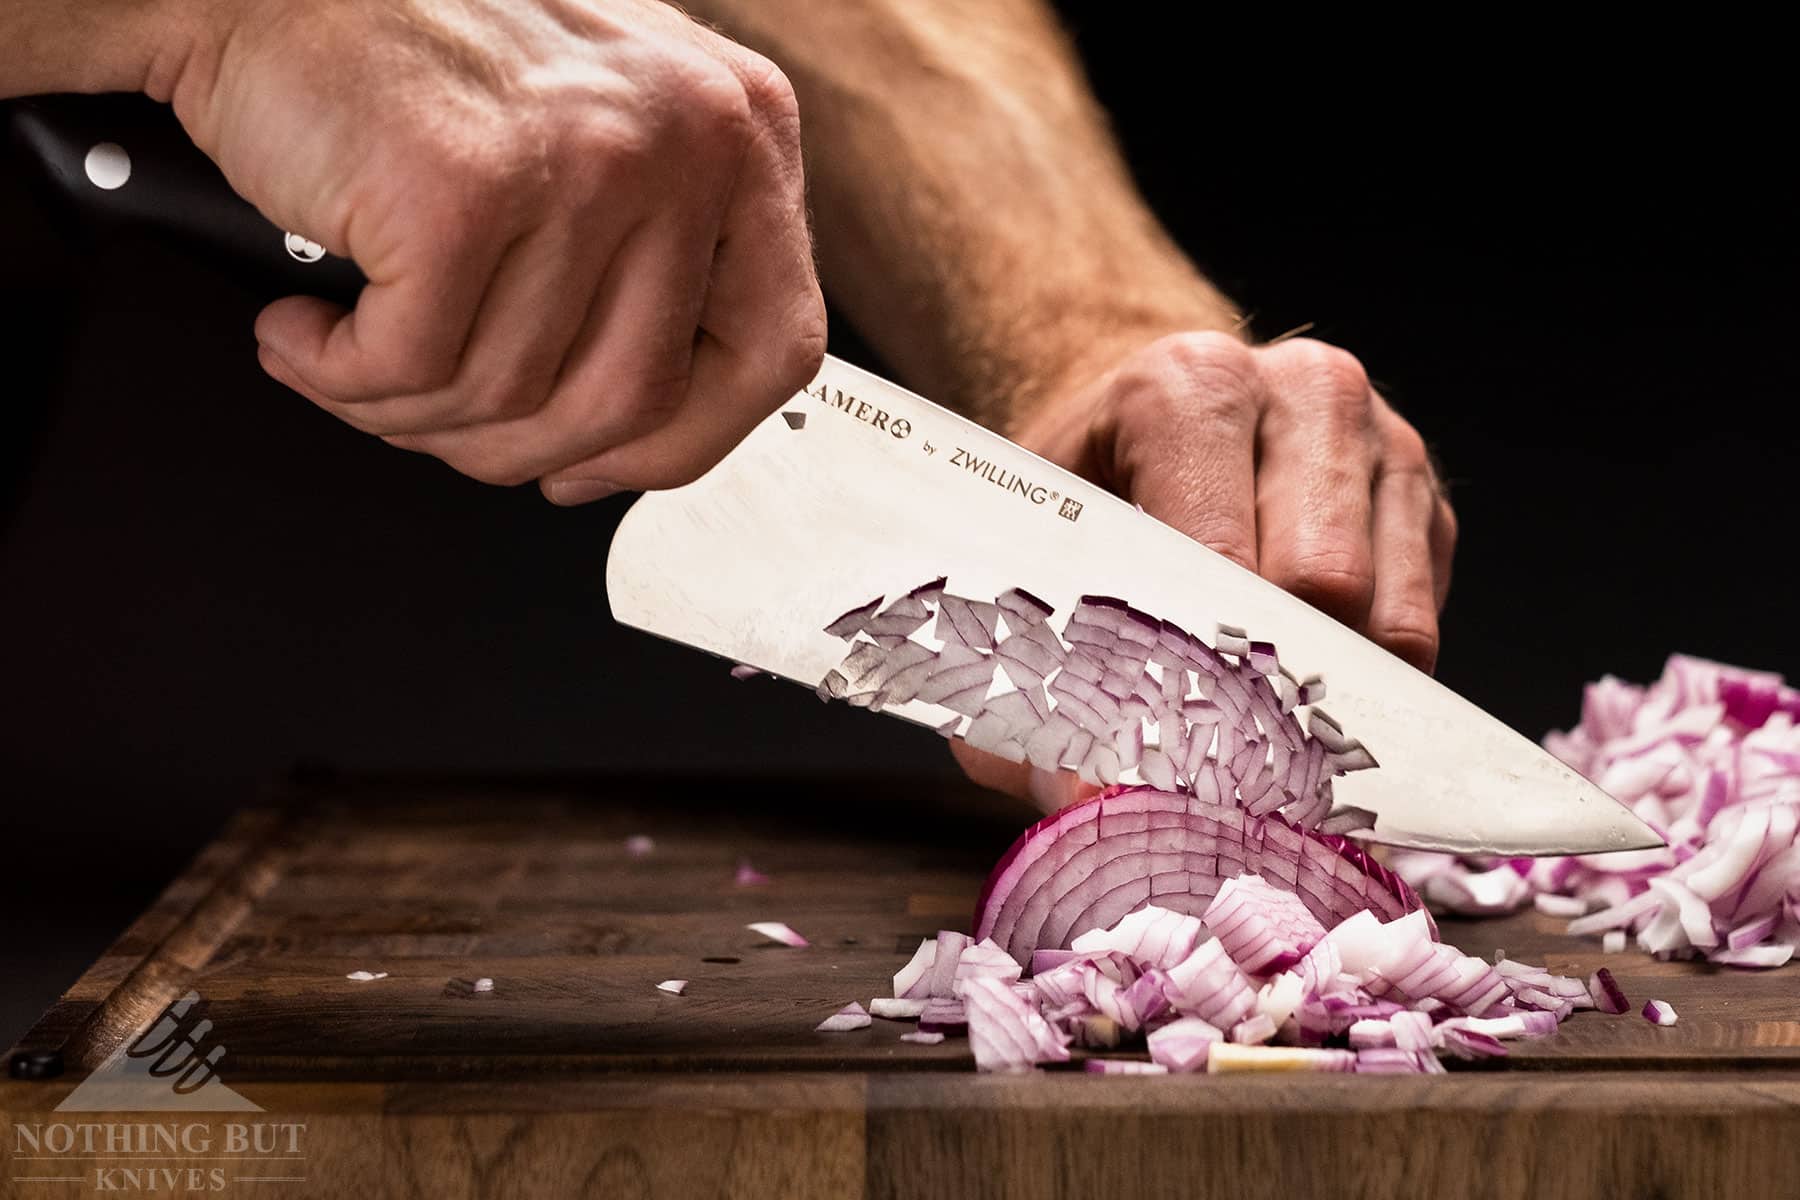 Diced onions sticking to the blade of a Kramer By Zwilling chef knife.